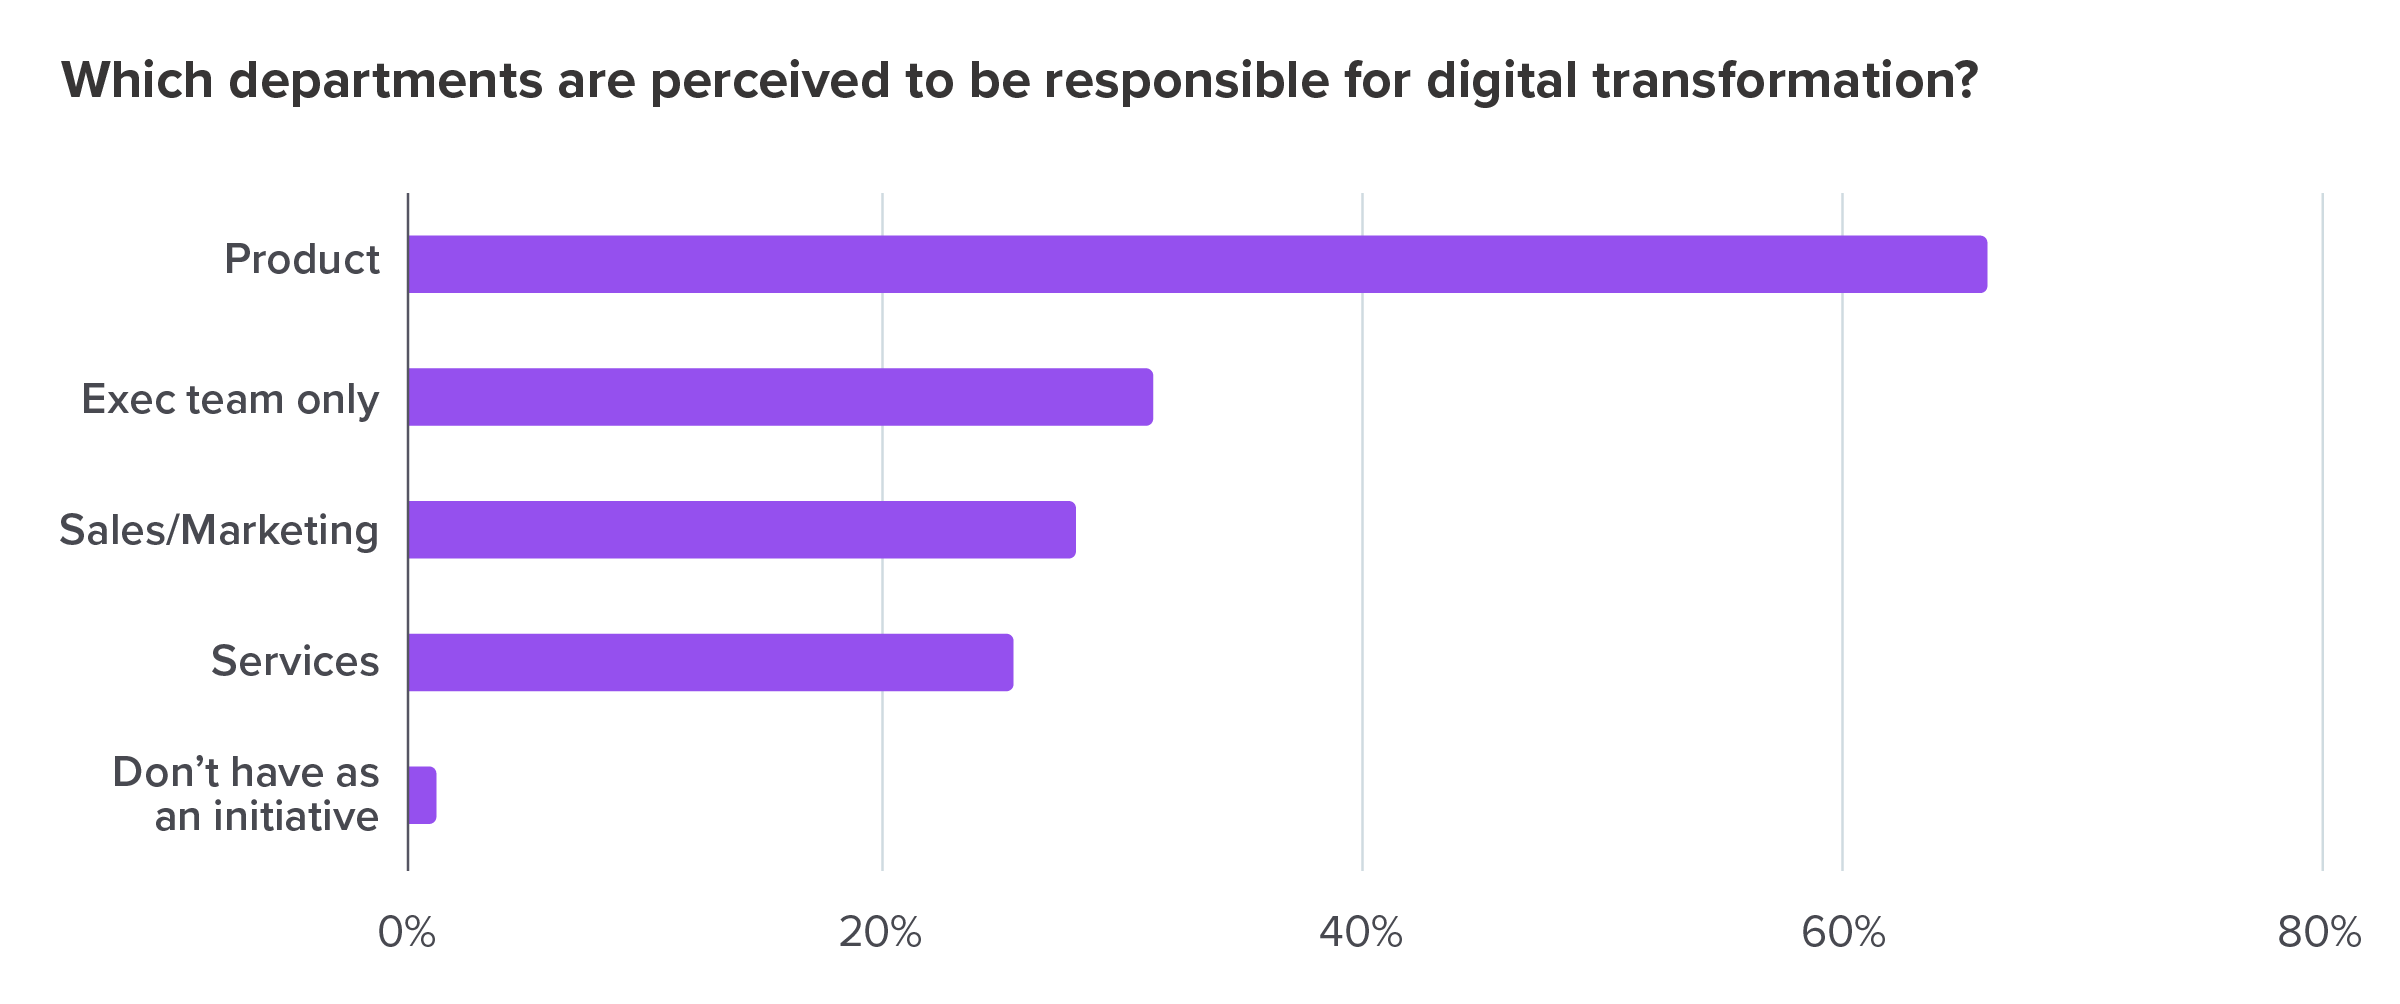 Which departments are perceived to be responsible for digital transformation?